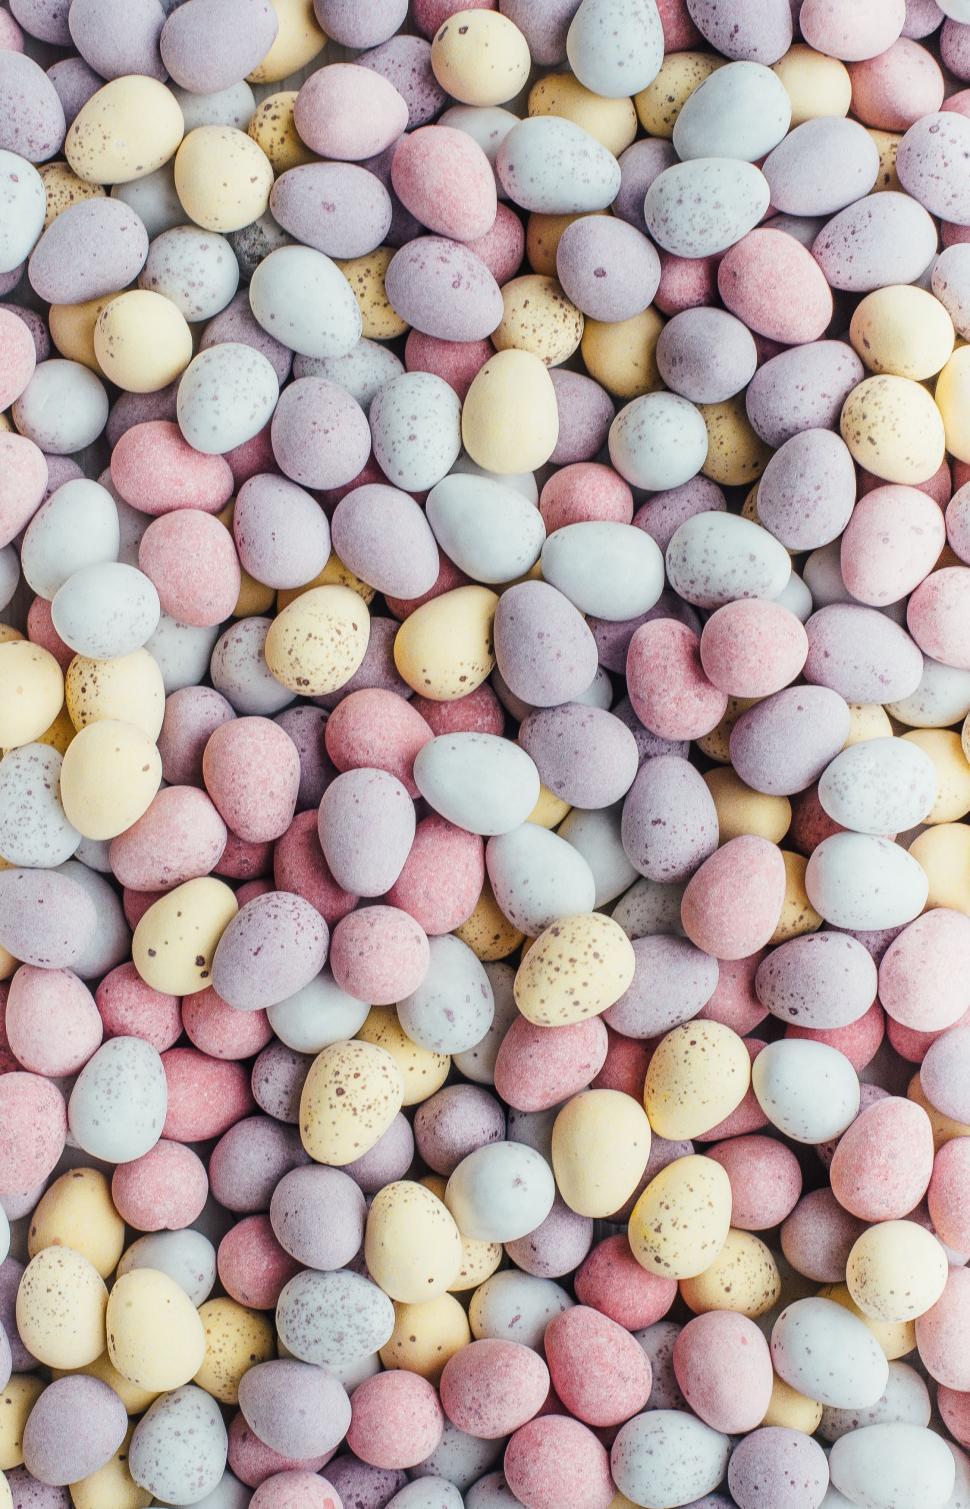 Free Image of Close Up of Colorful Candy Eggs 